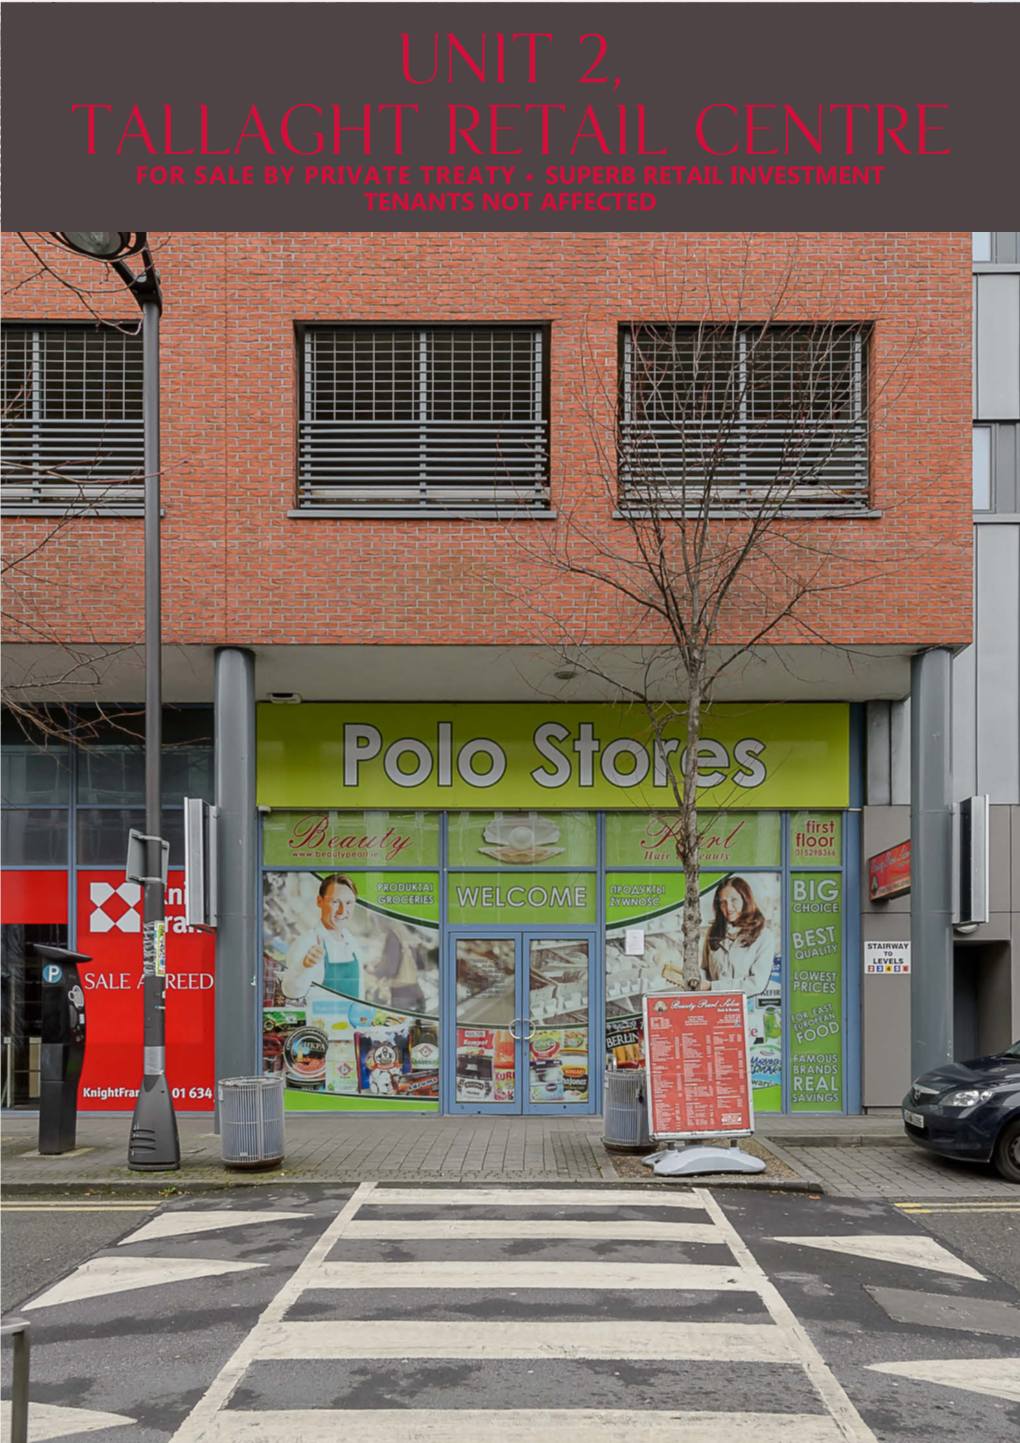 UNIT 2, TALLAGHT RETAIL Centre for SALE by PRIVATE TREATY • SUPERB RETAIL INVESTMENT TENANTS NOT AFFECTED UNIT 2, TALLAGHT RETAIL CENTRE - SUPERB RETAIL INVESTMENT